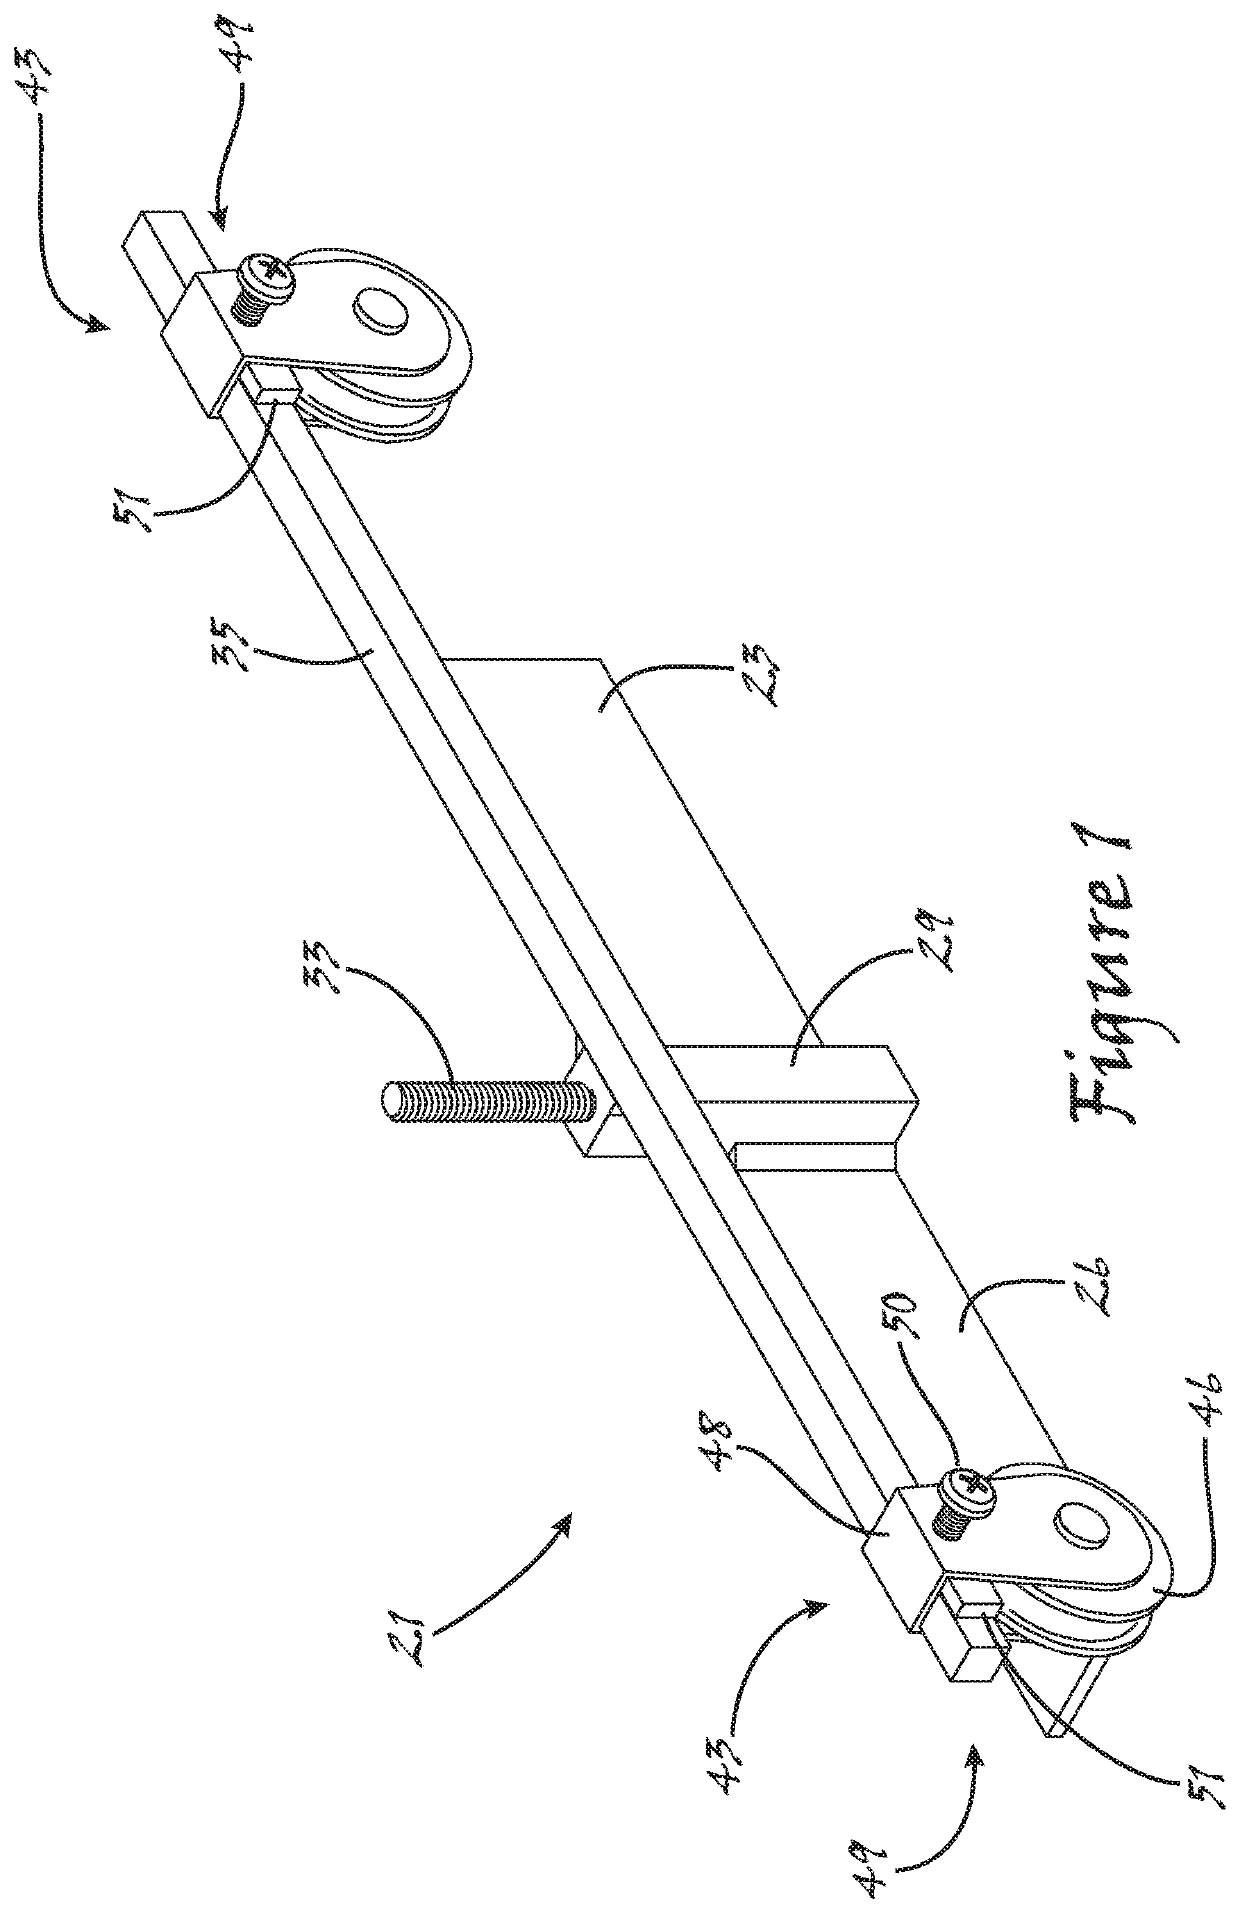 Pulley assembly for liquid level gauging system